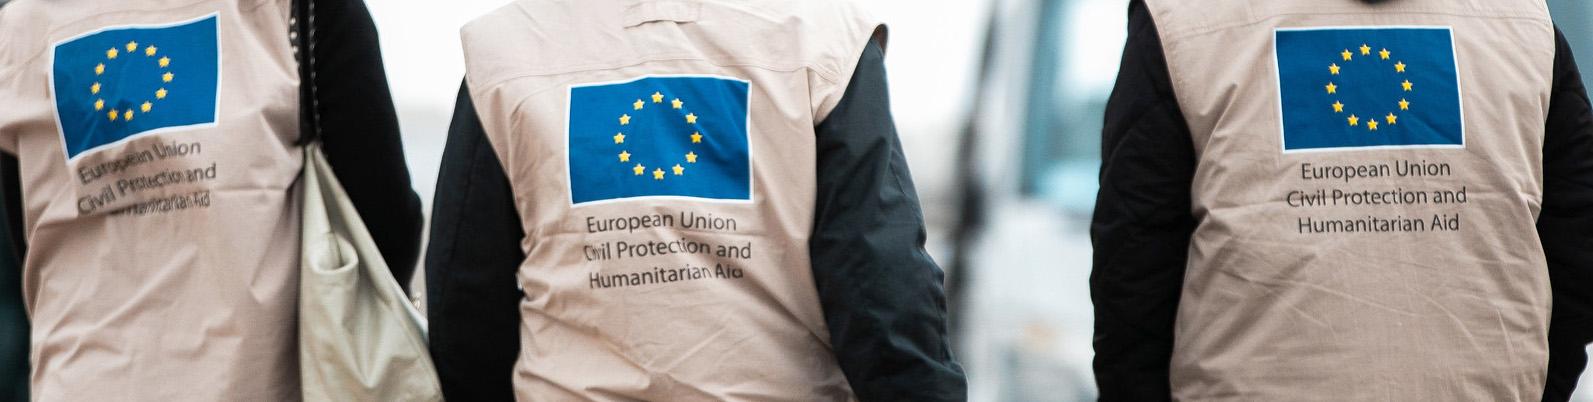 3 EU flags on the backside of humanitarian aid workers